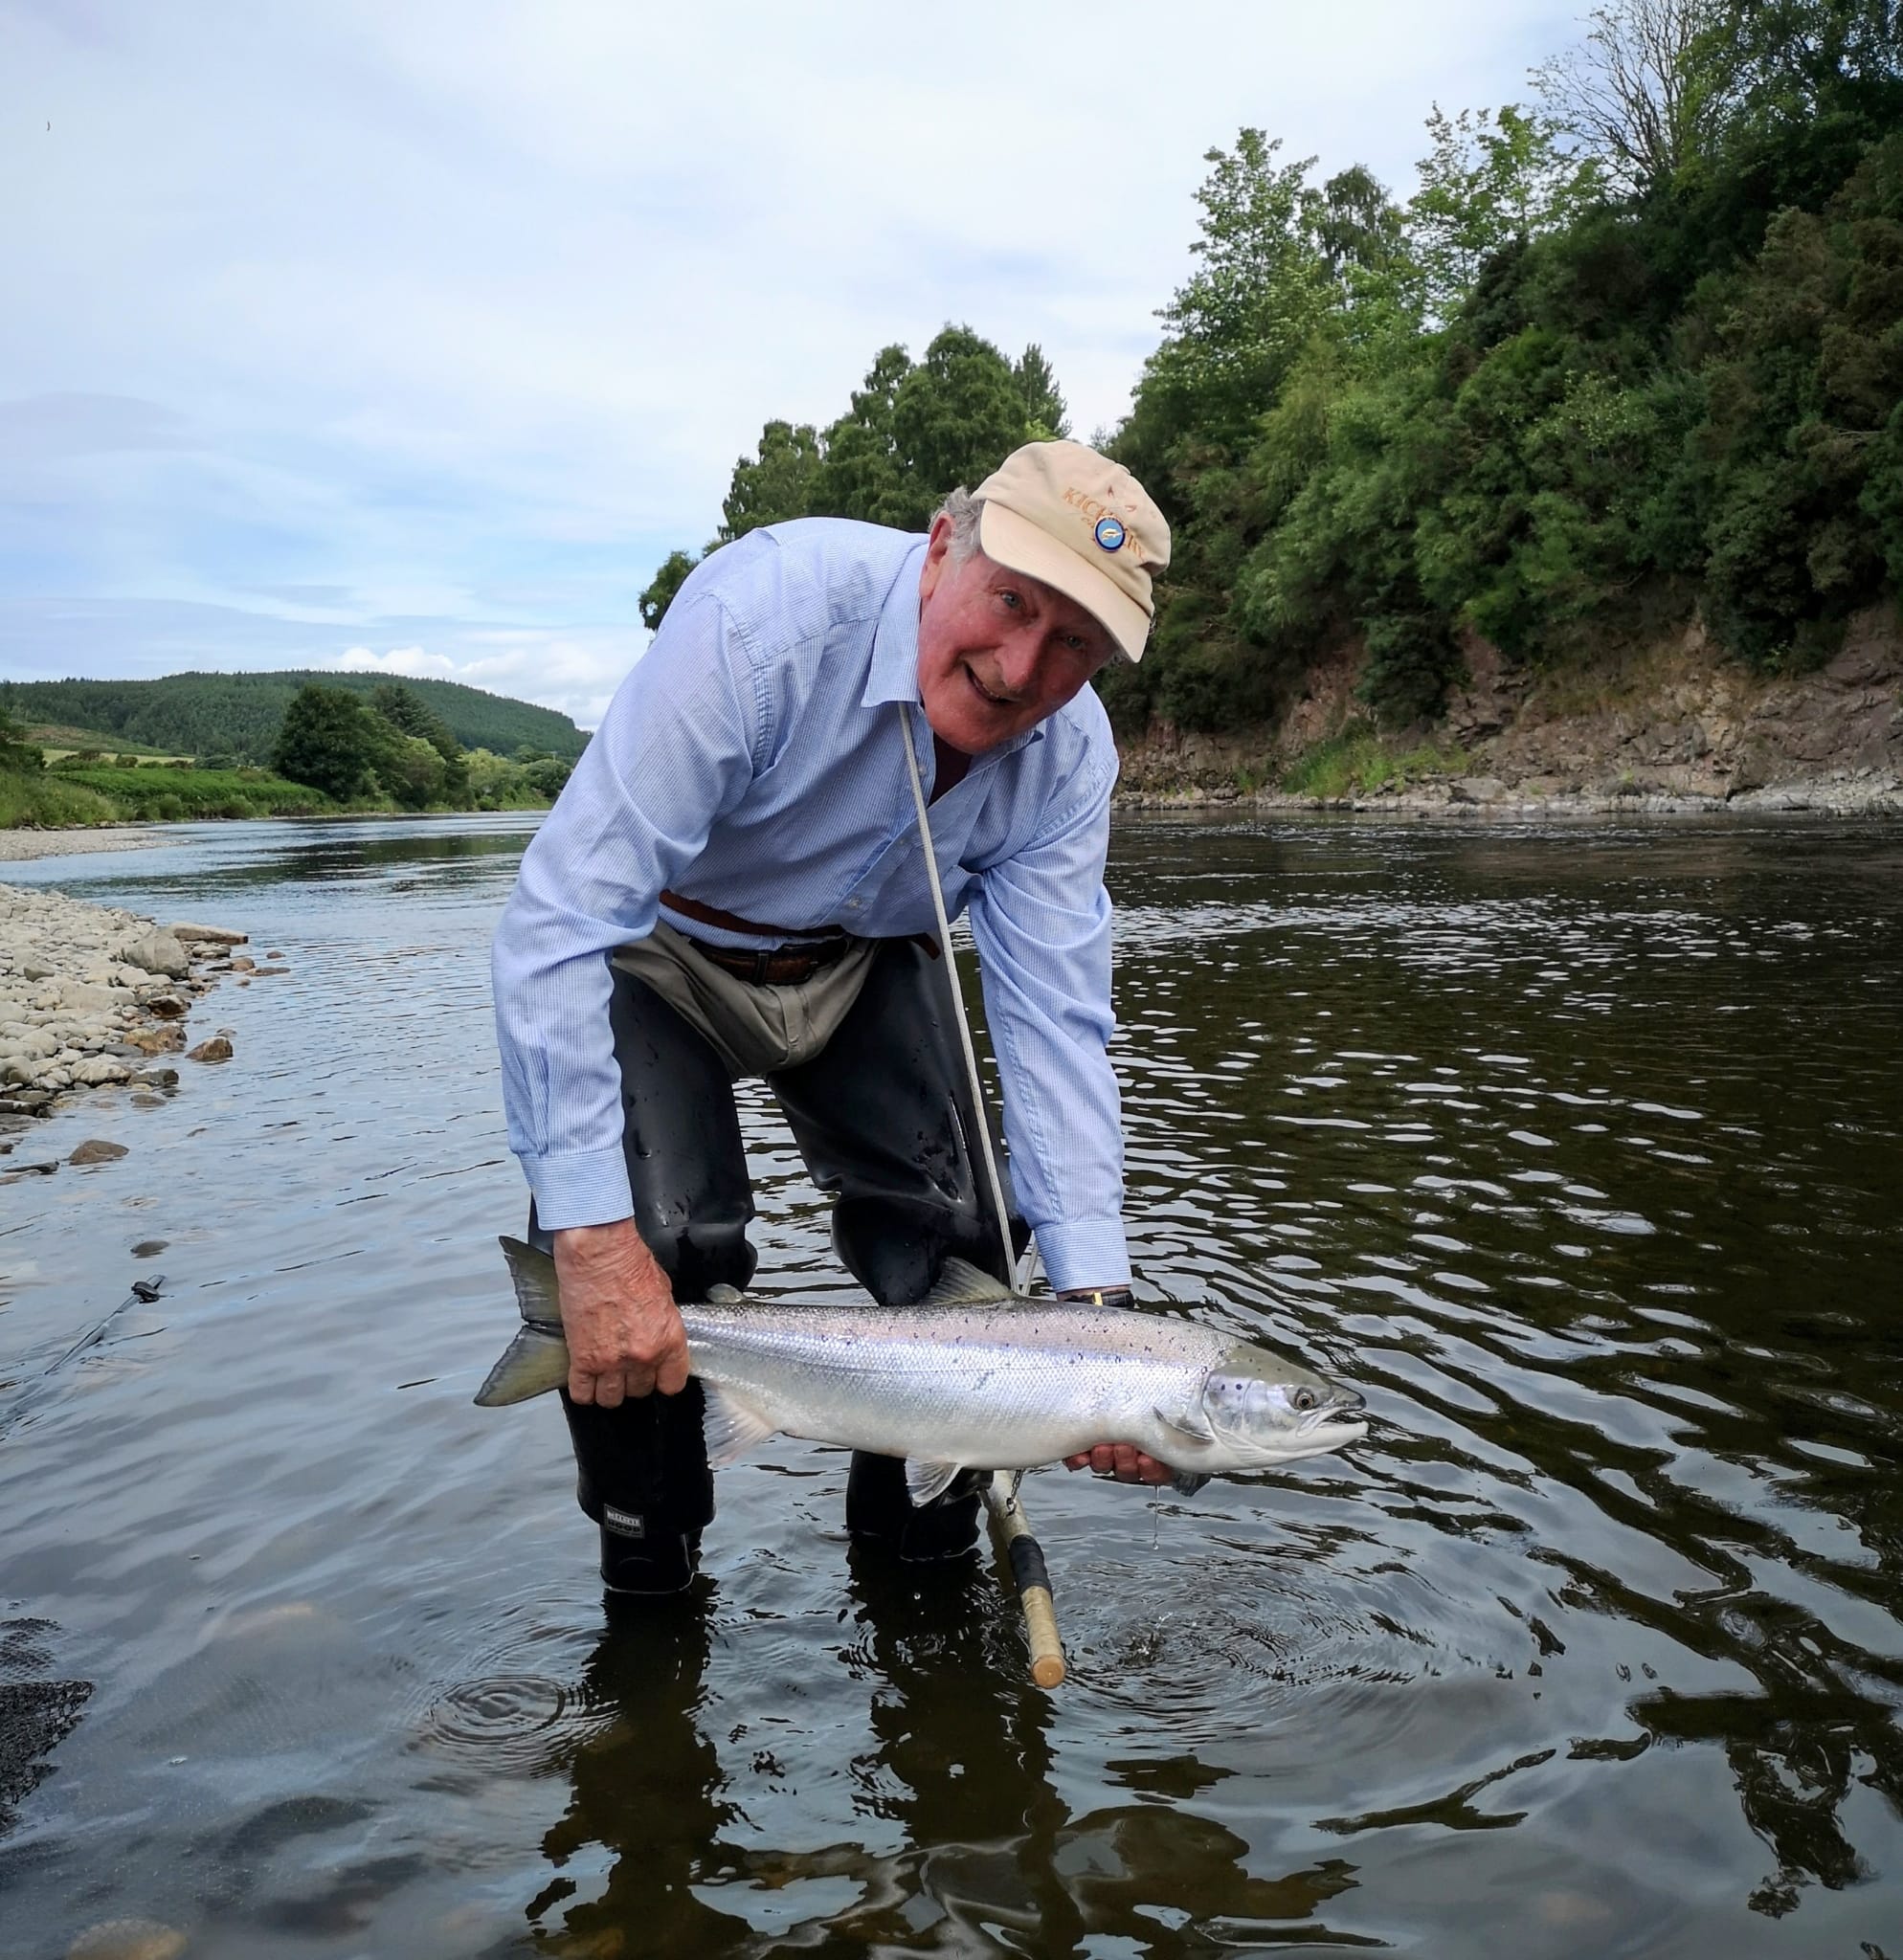 Paul Smith: Now to choose a salmon rod